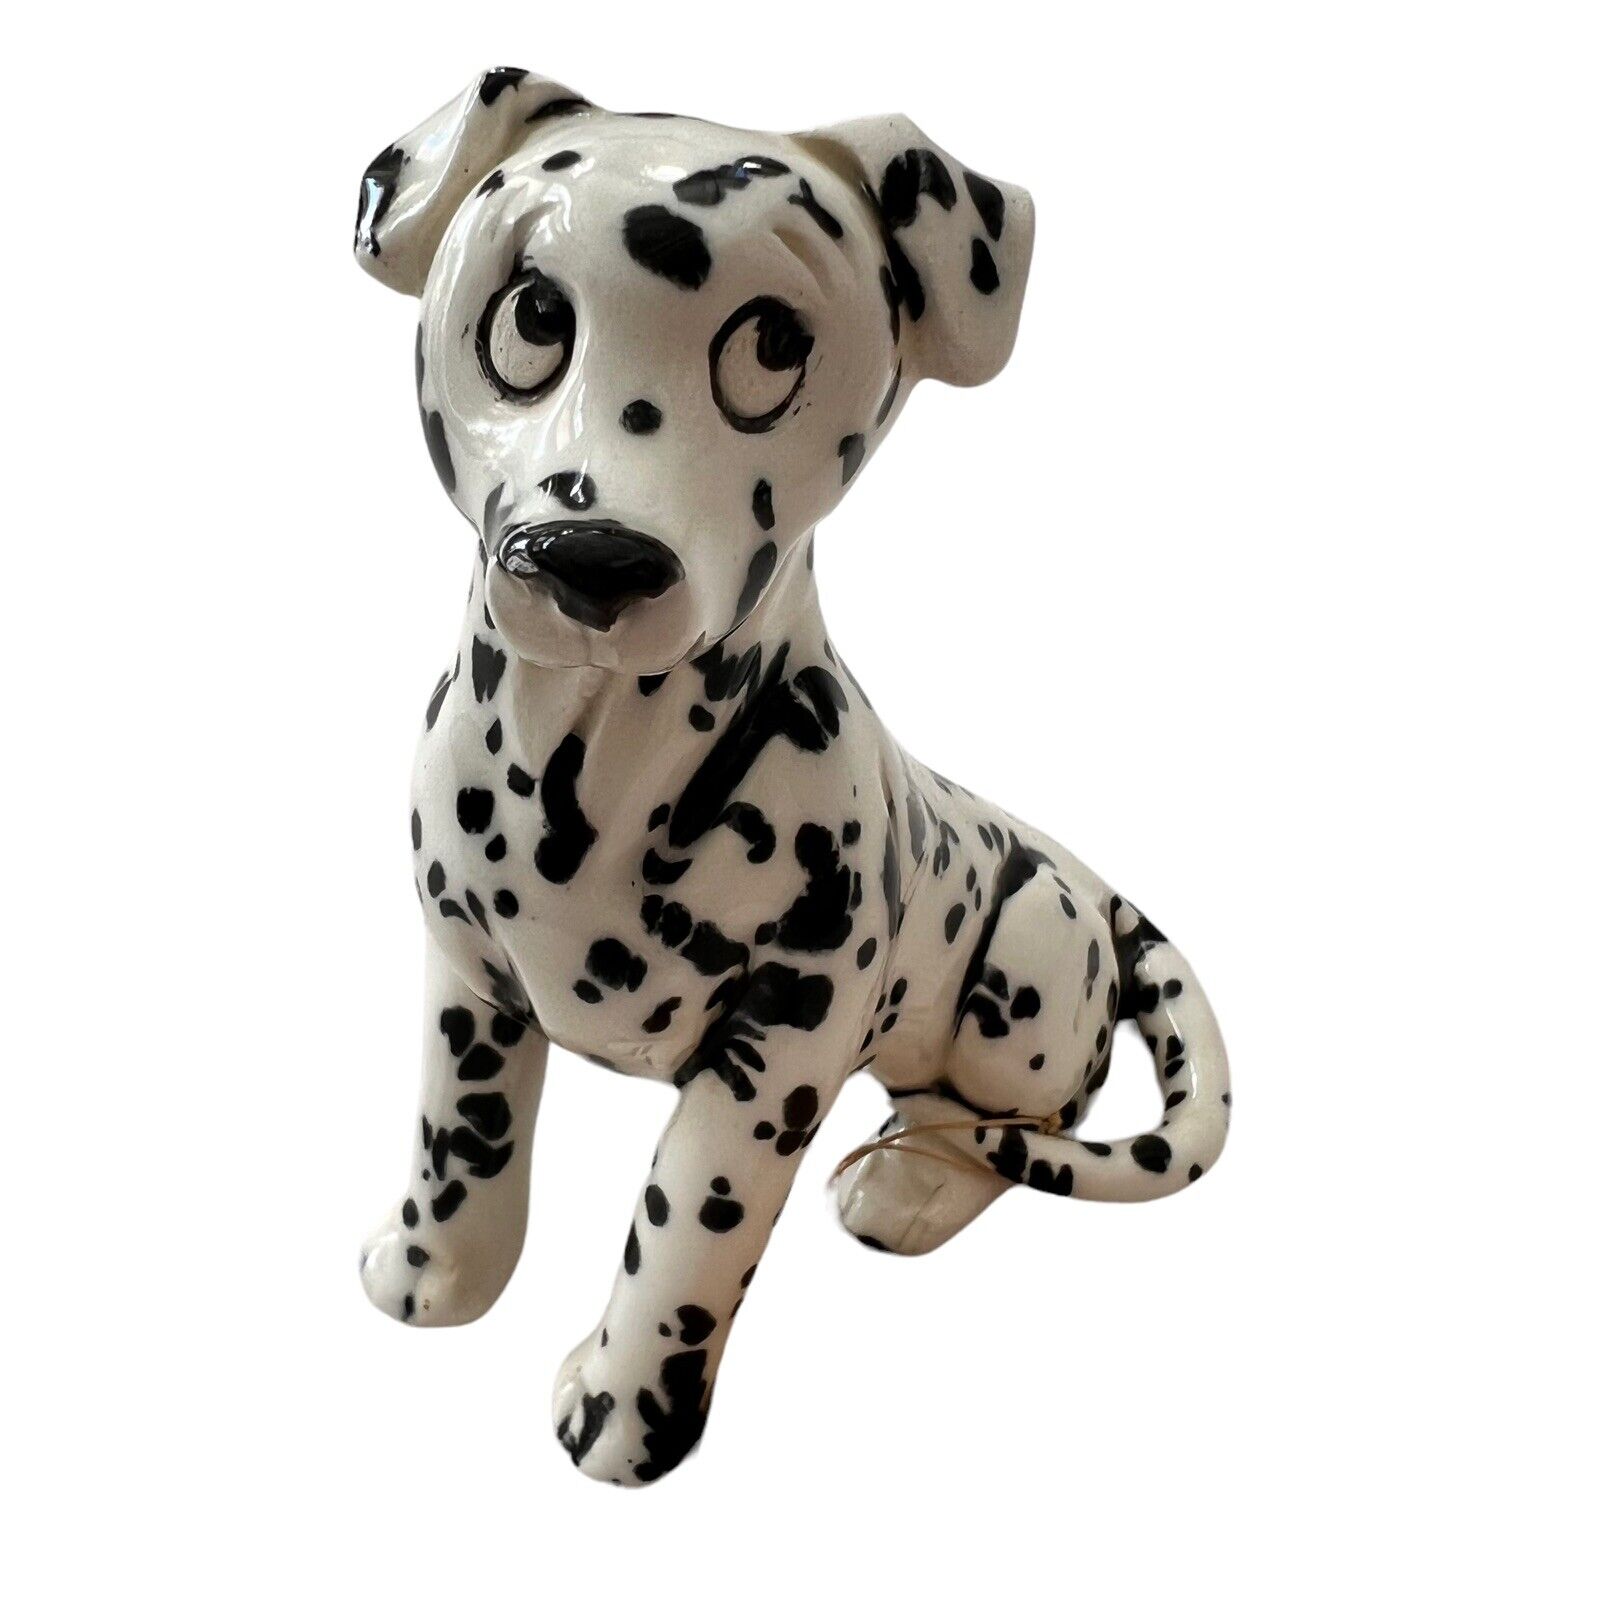 Purebred Pets Dalmation Porcelain Dog Figure 1981 Kathy Wise Wise Crackers 4”